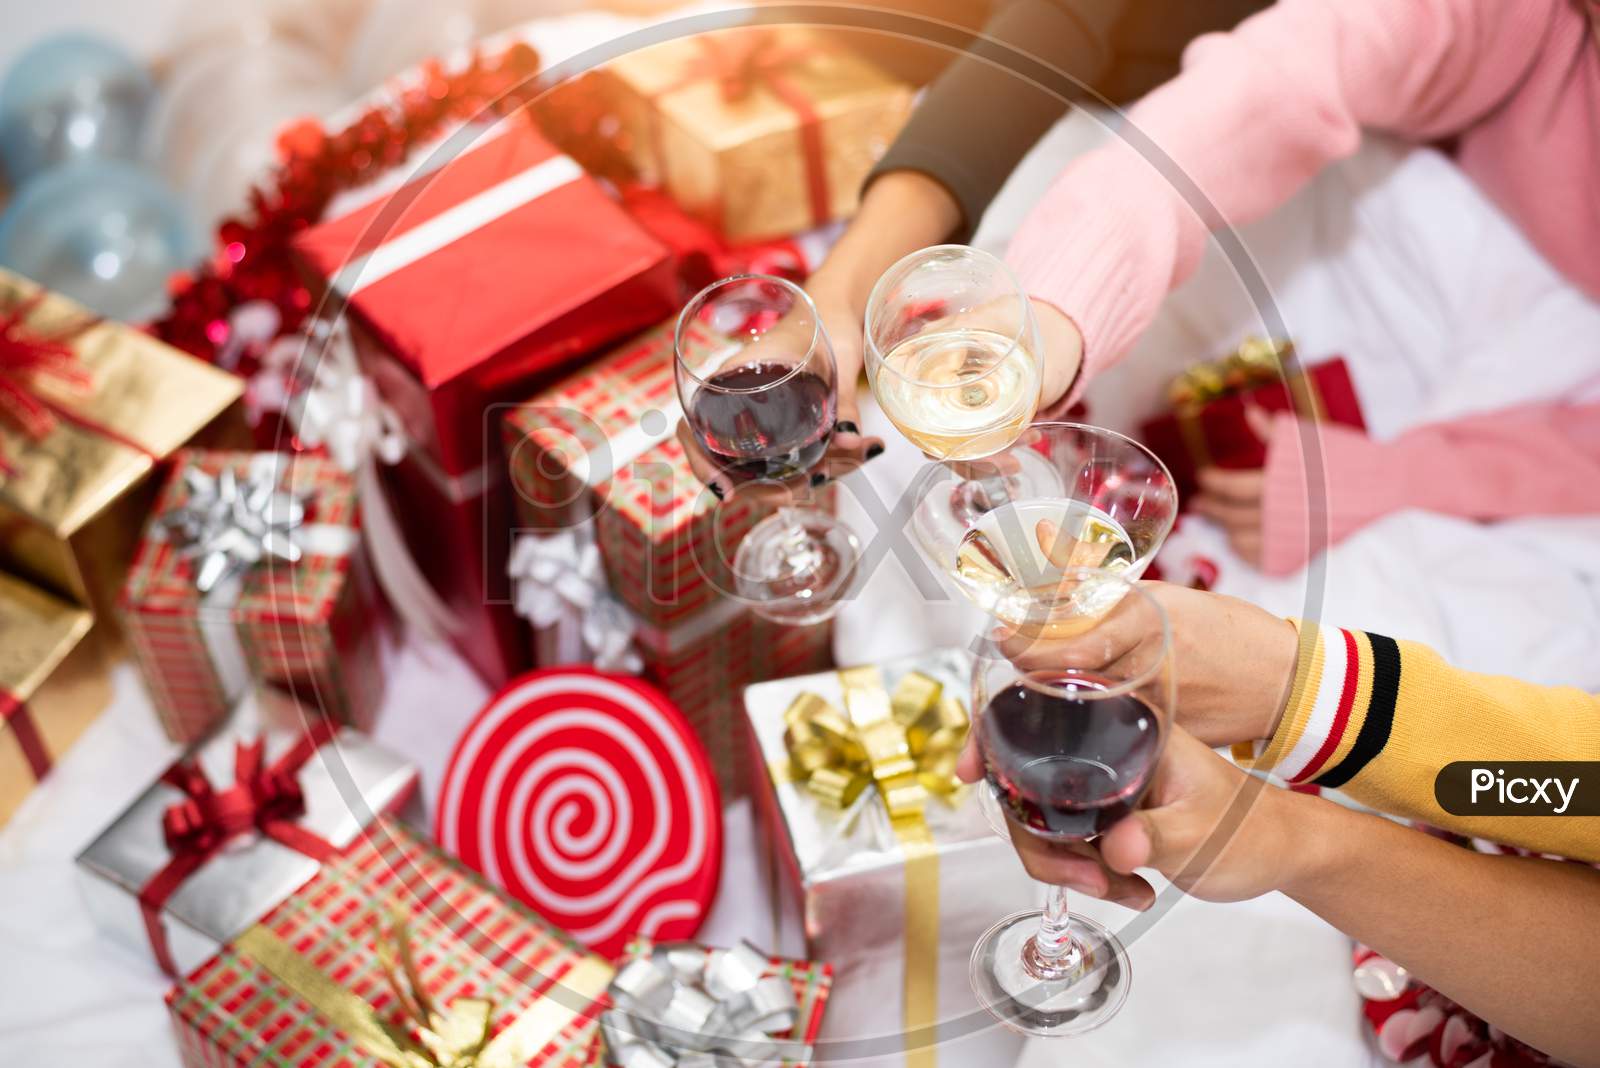 Hands Of People Celebrating New Year Party In Home With Wine Drinking Glasses And Present Background. New Year And Christmas Party Concept. Happiness And Friendship And Funny Together. Clinking Glass